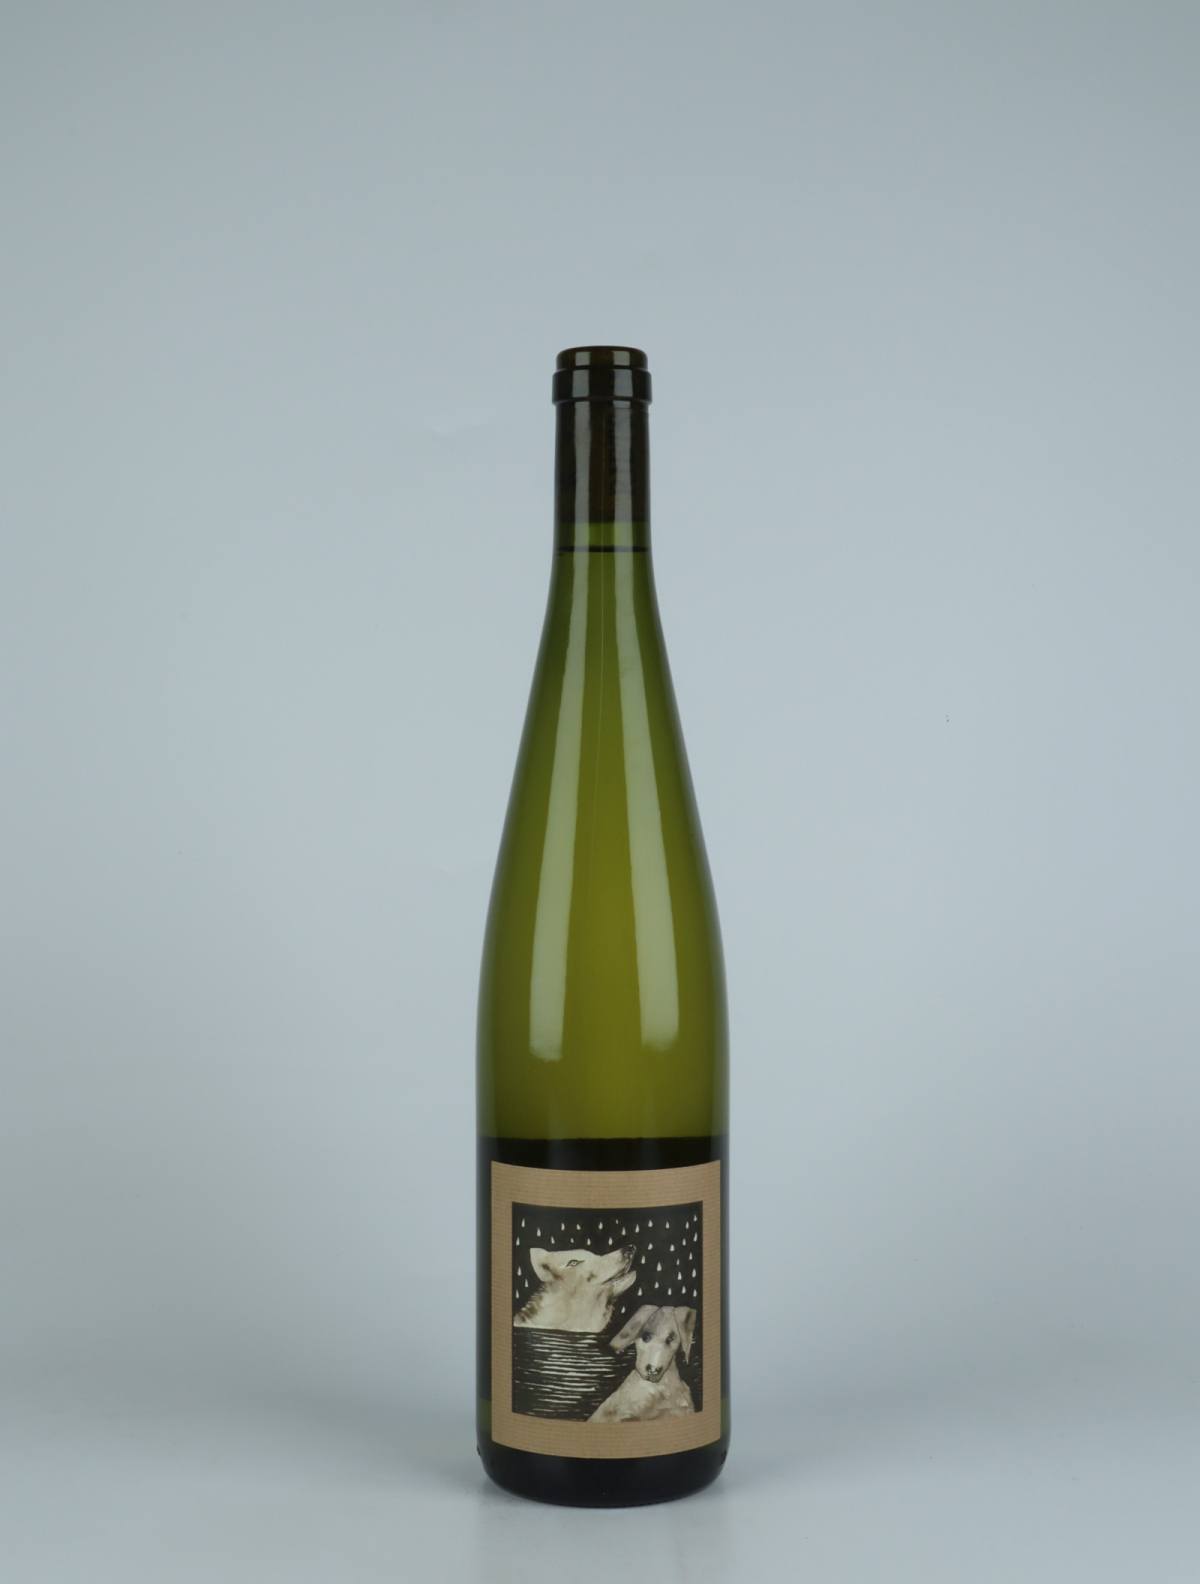 A bottle 2021 Entre Chien et Loup White wine from Domaine Rietsch, Alsace in France